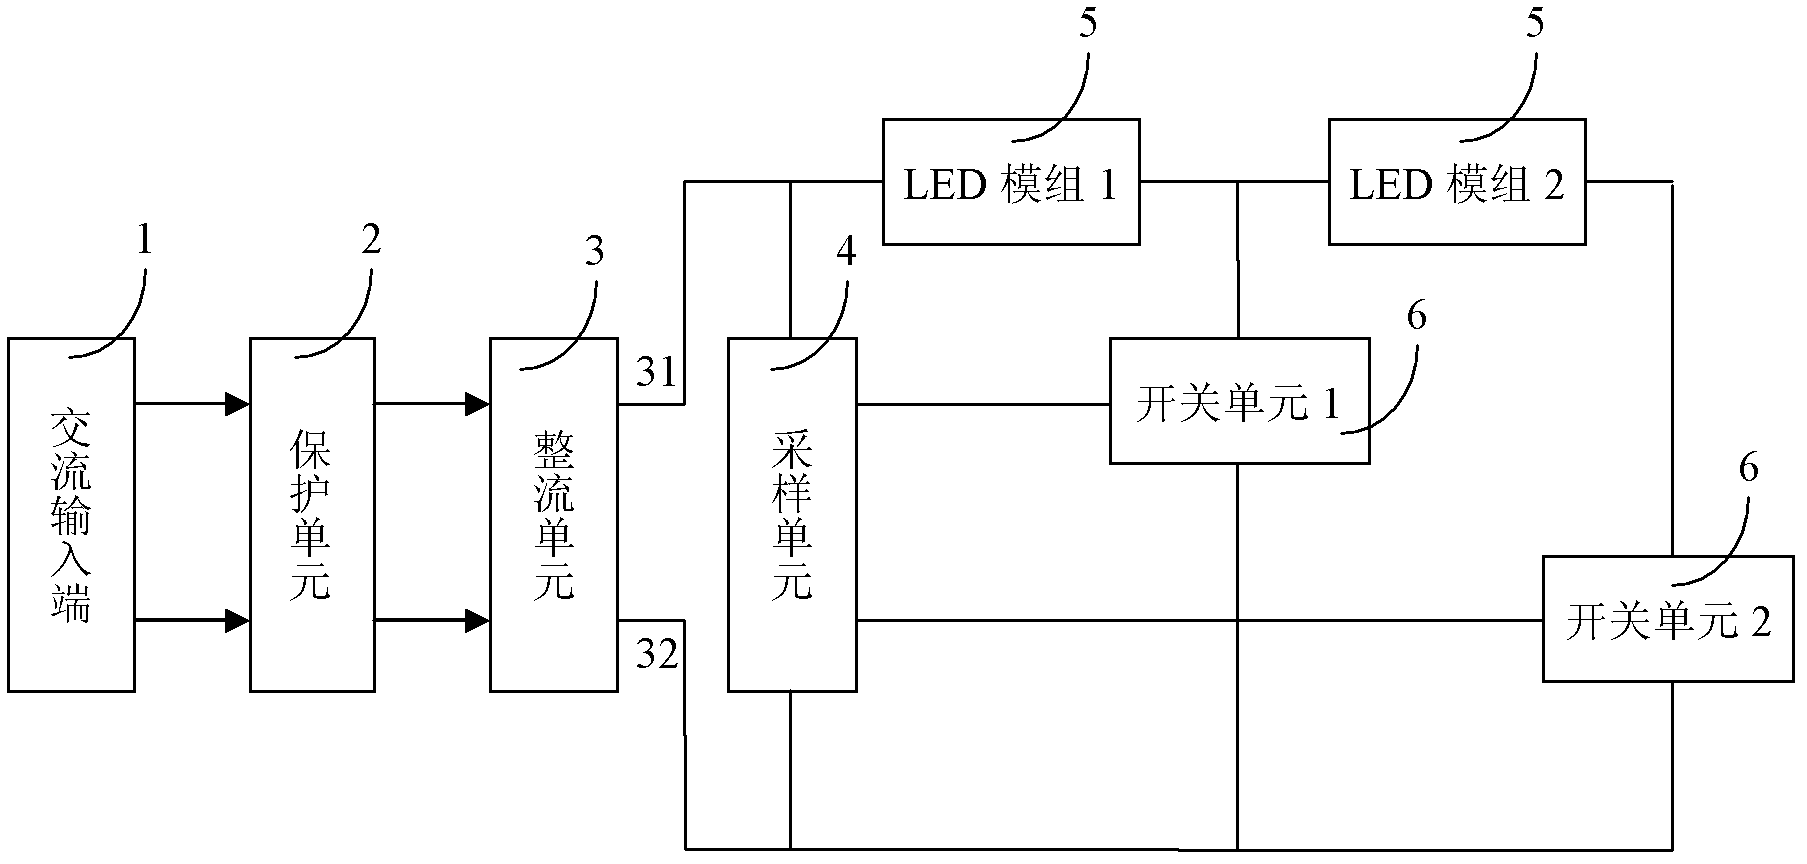 Light emitting diode (LED) light-emitting device directly driven by alternating current